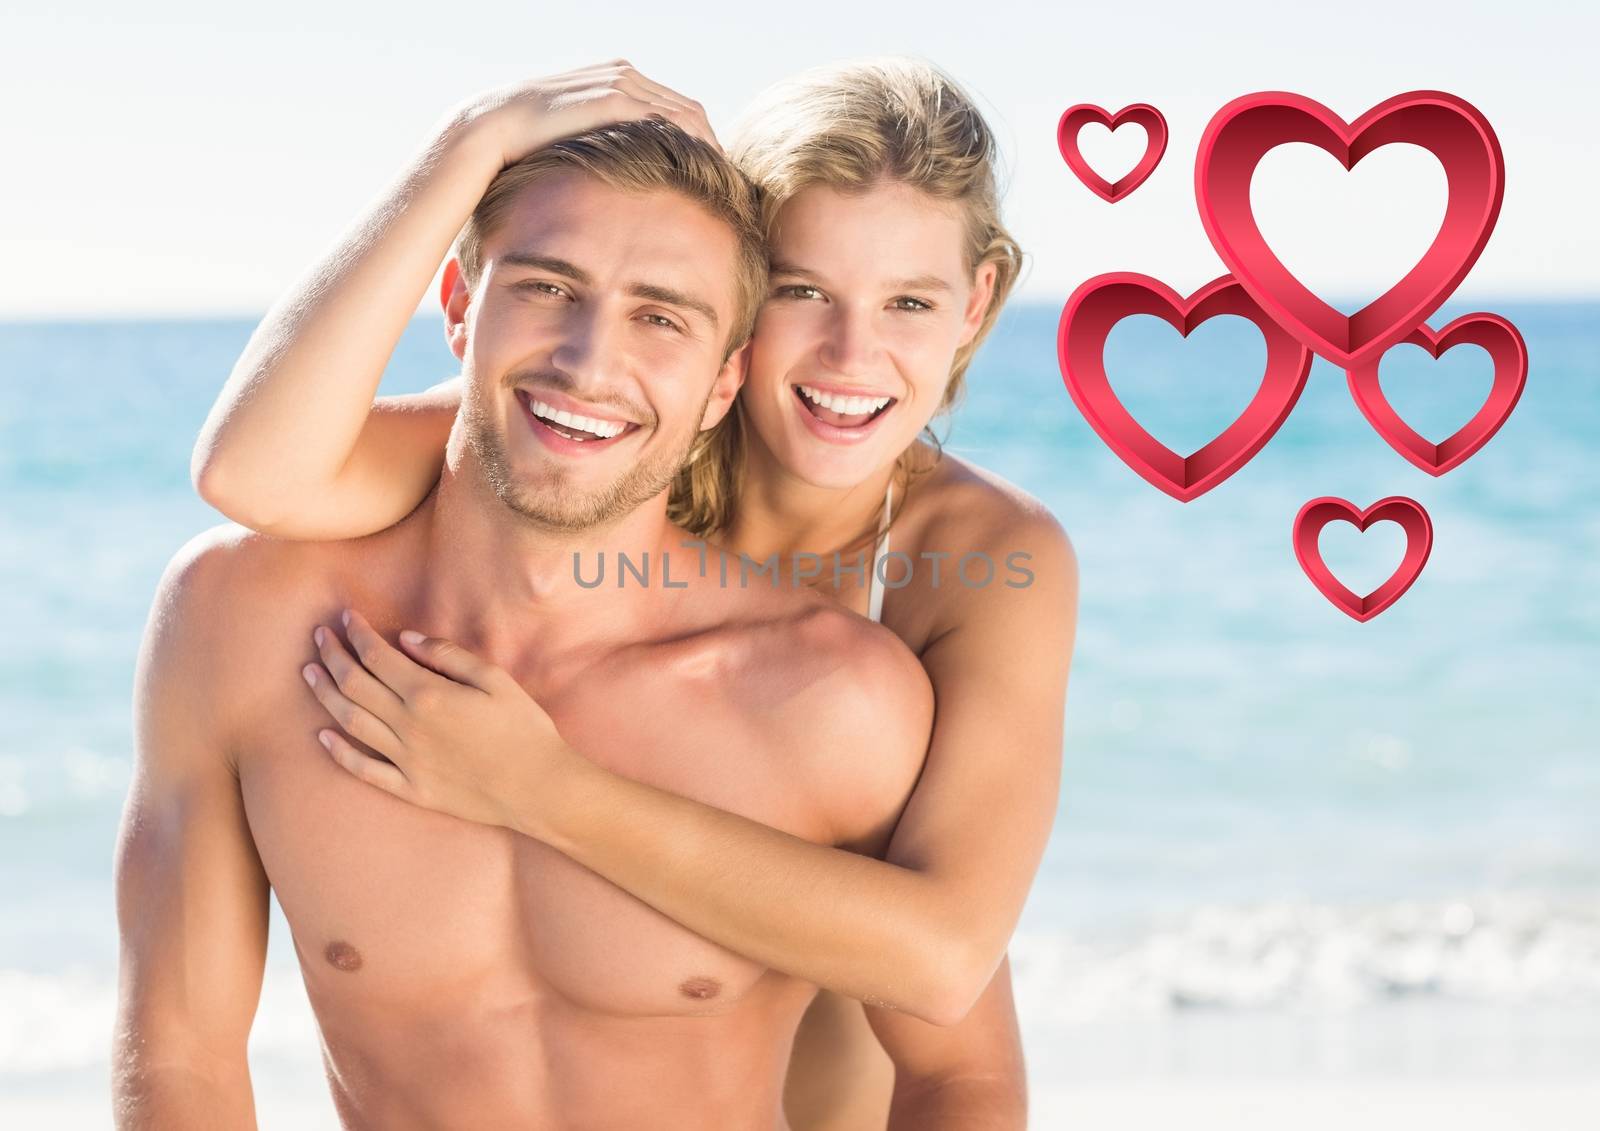 Composite images of romantic couple embracing on beach with heart shapes